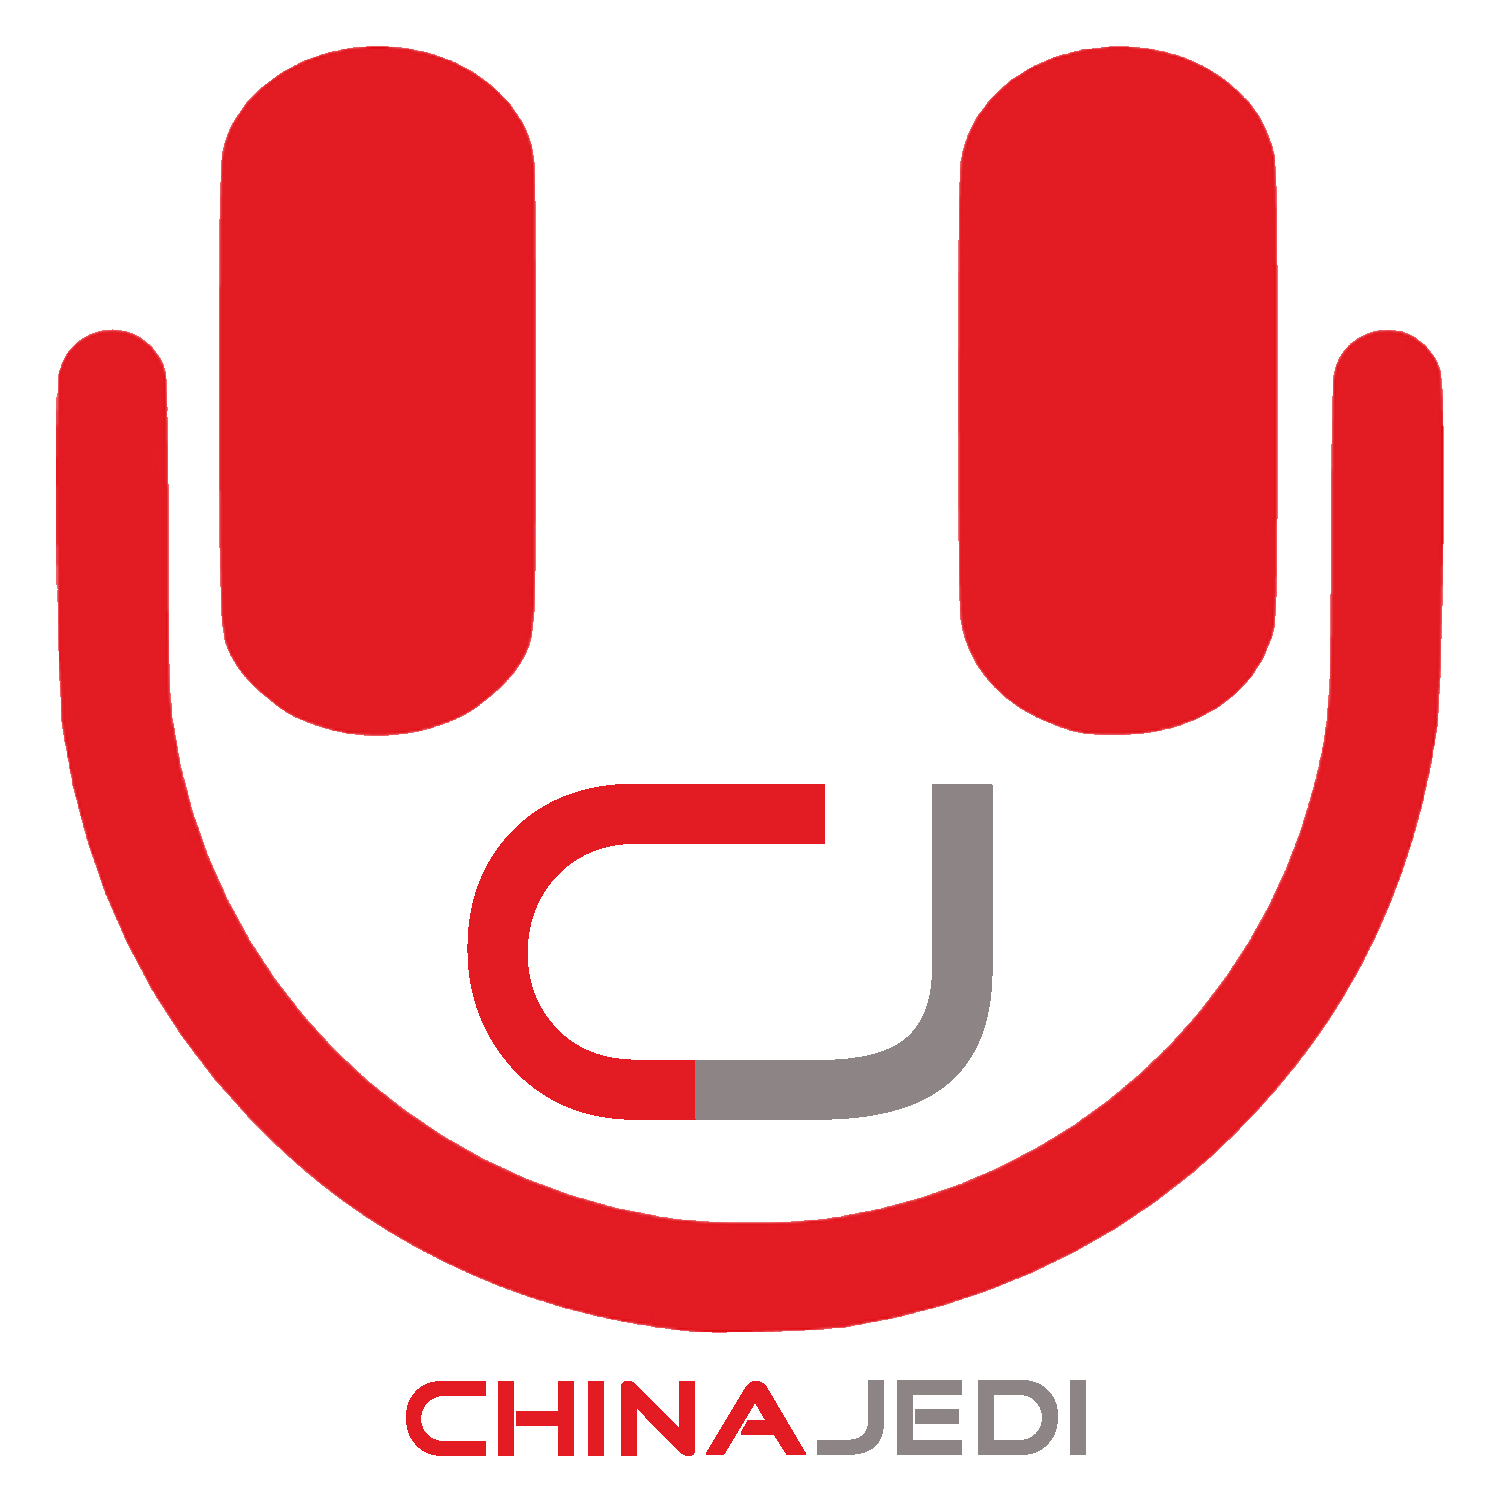 China Jedi Podcast: Expat Life | Chinese Culture | Business | Travel | Education | Language | Teaching